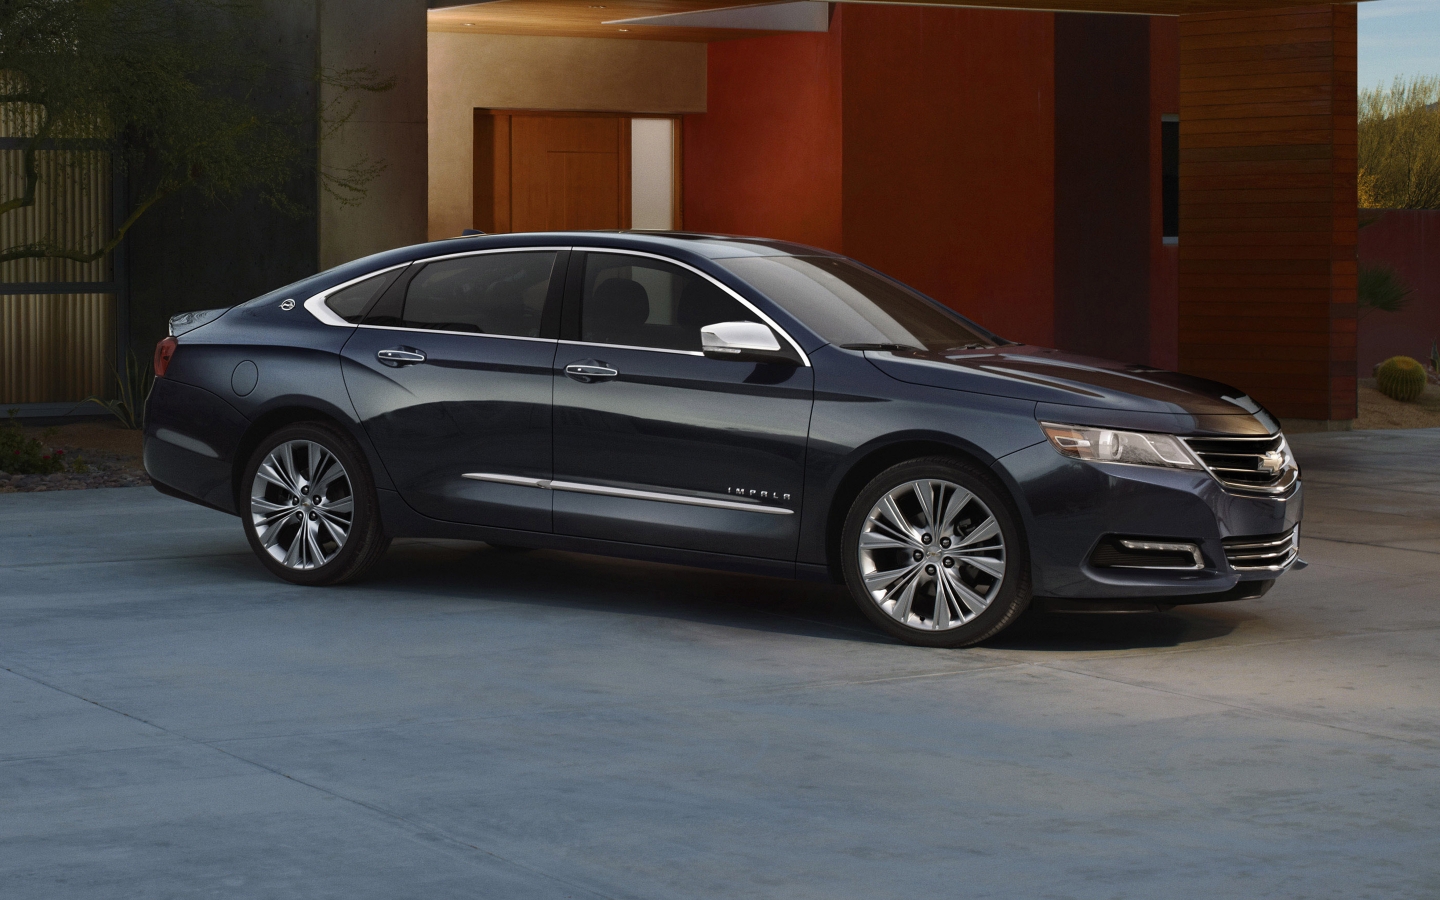 2014 Chevrolet Impala for 1440 x 900 widescreen resolution